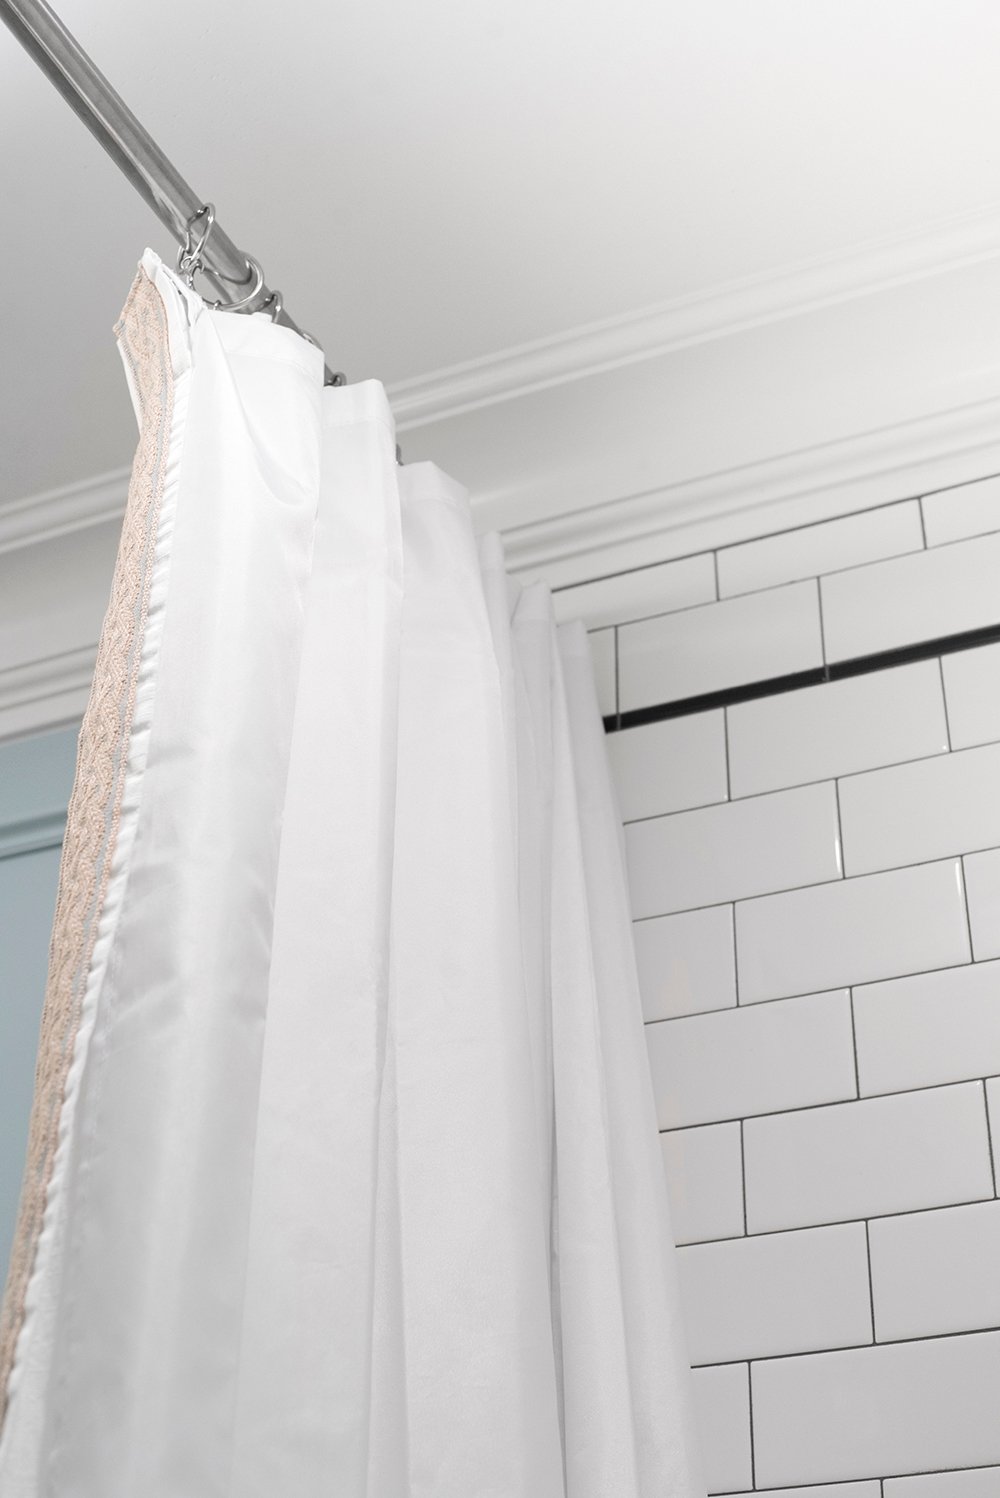 Extra Long Shower Curtain DIY - roomfortuesday.com